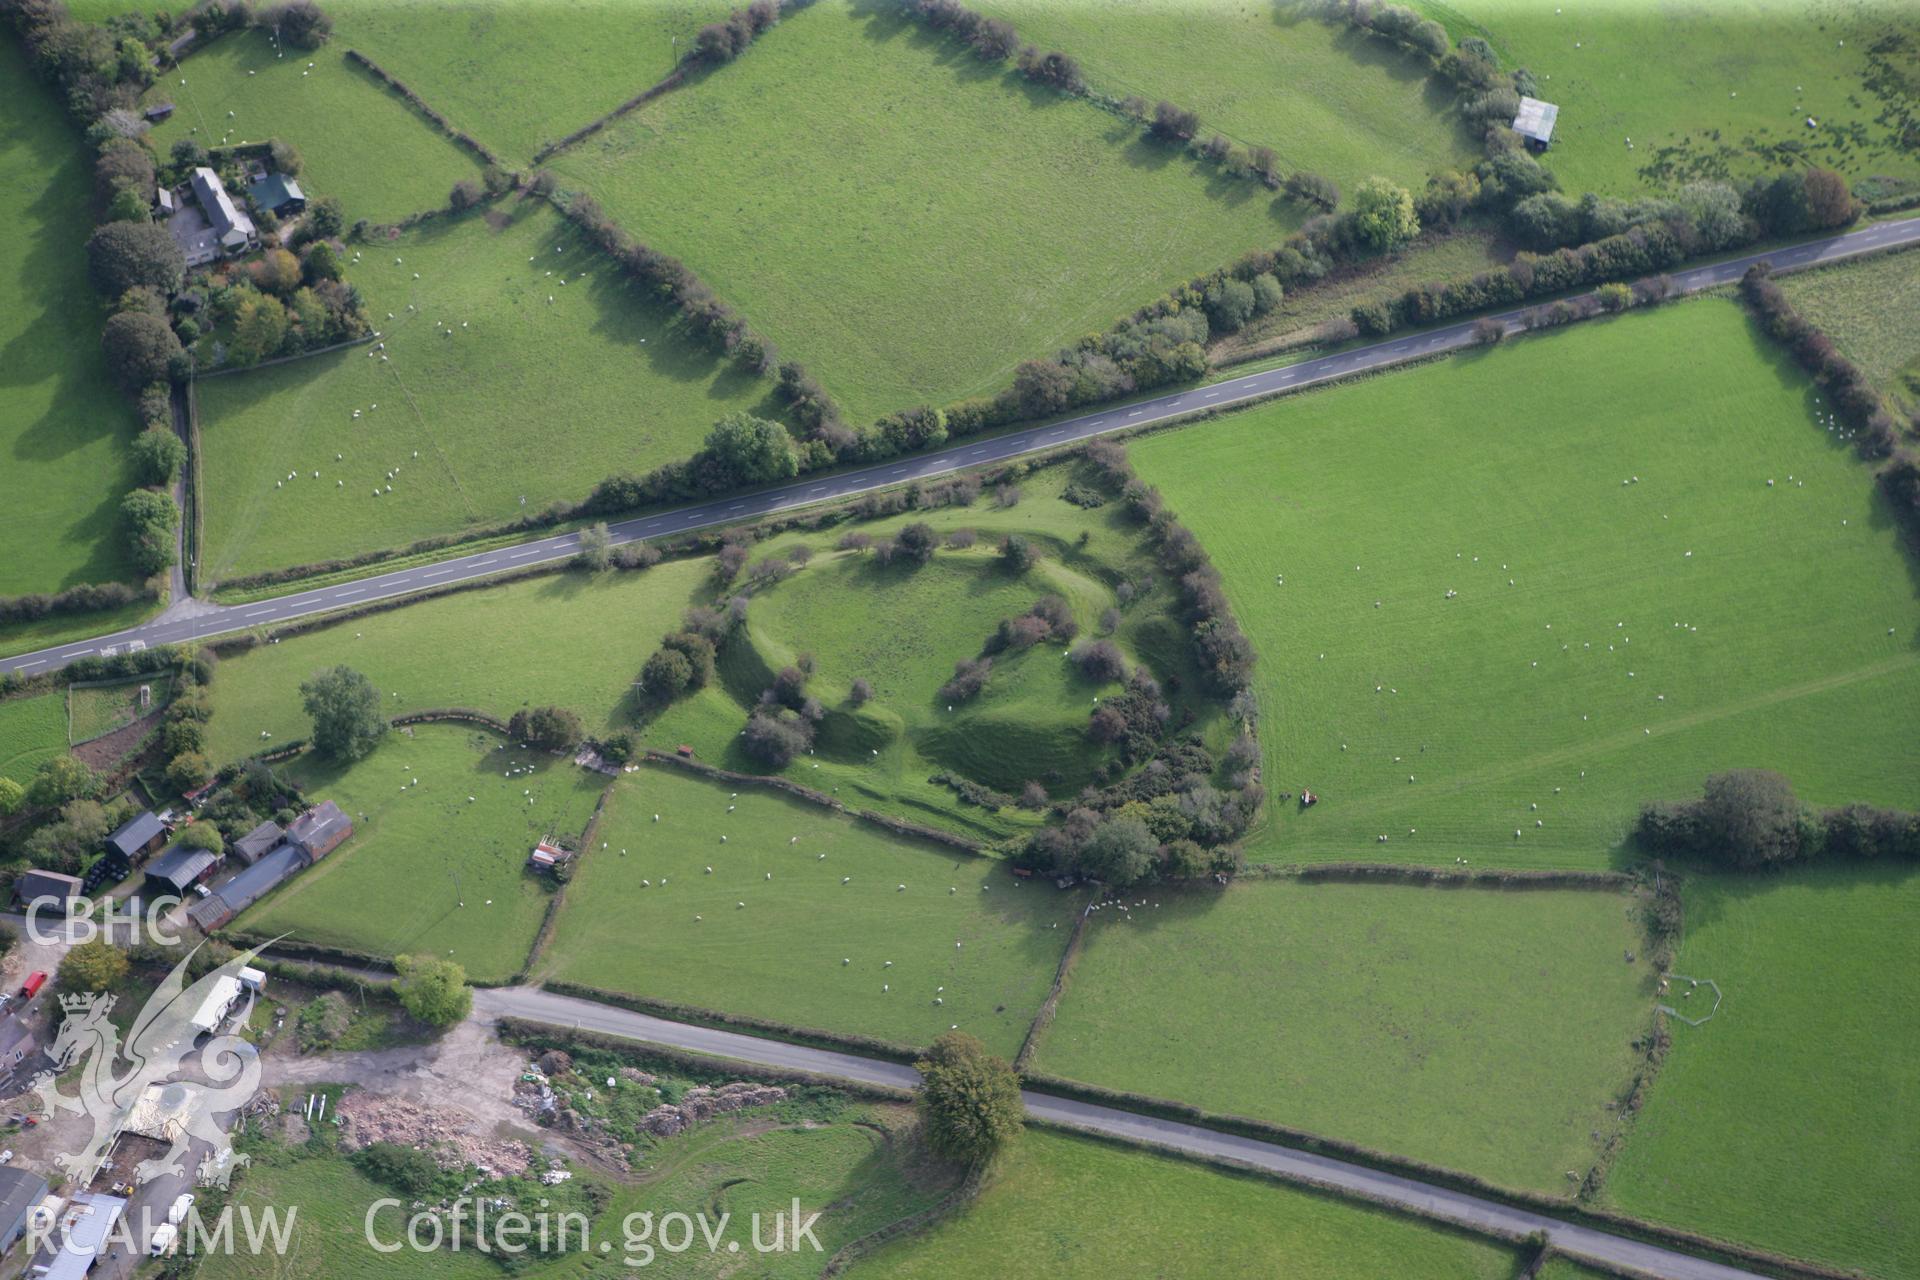 RCAHMW colour oblique aerial photograph of Tomen-y-Rhodwydd. Taken on 13 October 2009 by Toby Driver